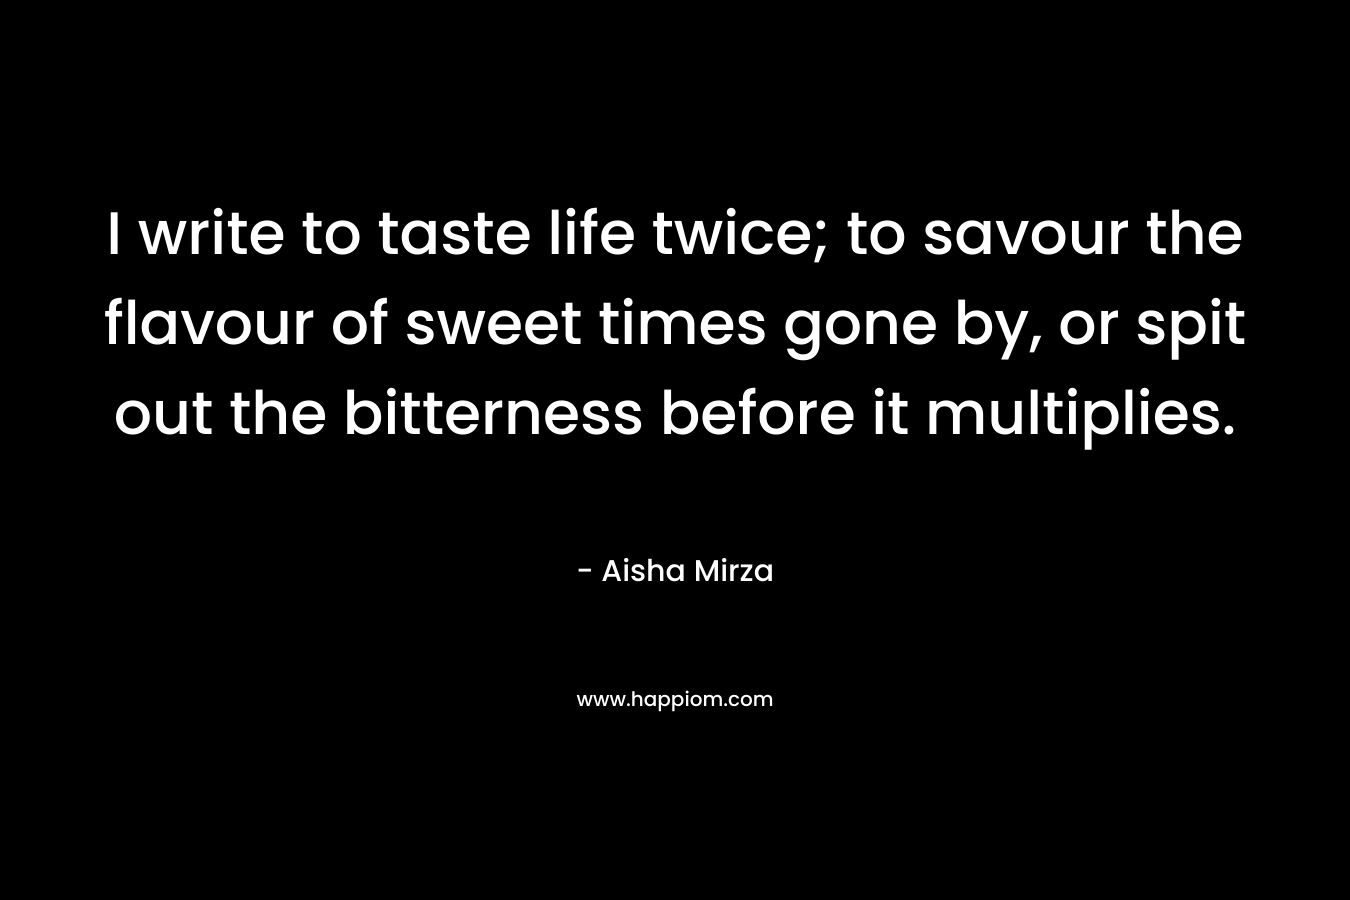 I write to taste life twice; to savour the flavour of sweet times gone by, or spit out the bitterness before it multiplies. – Aisha Mirza